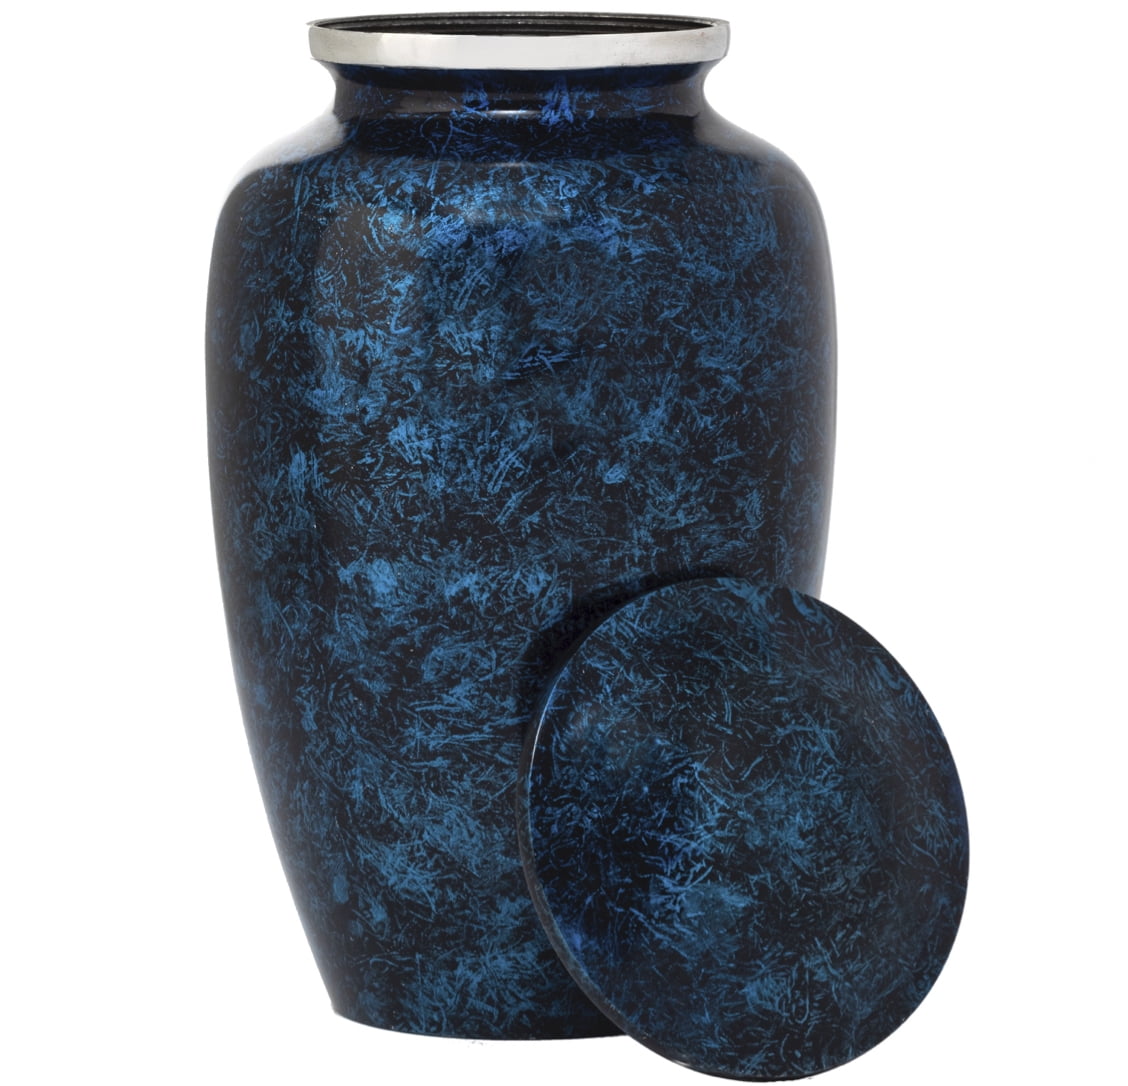 Adult Urn Large Size with Beautiful Velvet Bag Eternal Harmony Cremation Urn for Human Ashes Memorial Urn Carefully Handcrafted with Elegant Finishes to Honor Your Loved One Green Milo